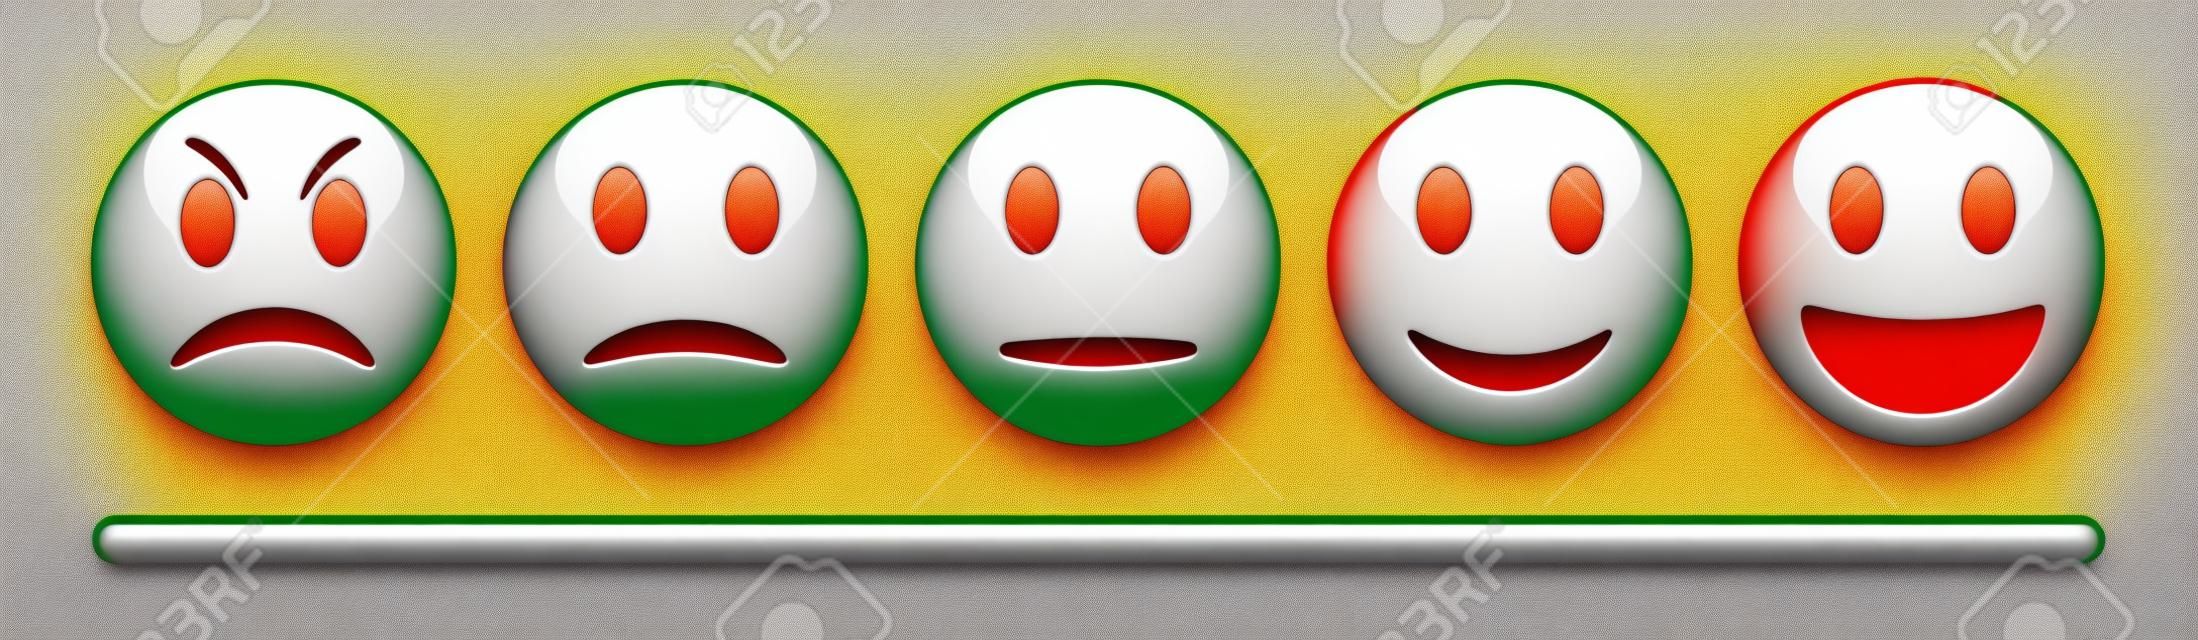 Vector emotion feedback scale on white background. Angry, sad, neutral and happy emoticon set. Glossy red, orange, yellow and green funny cartoon Emoji icon. 3D illustration